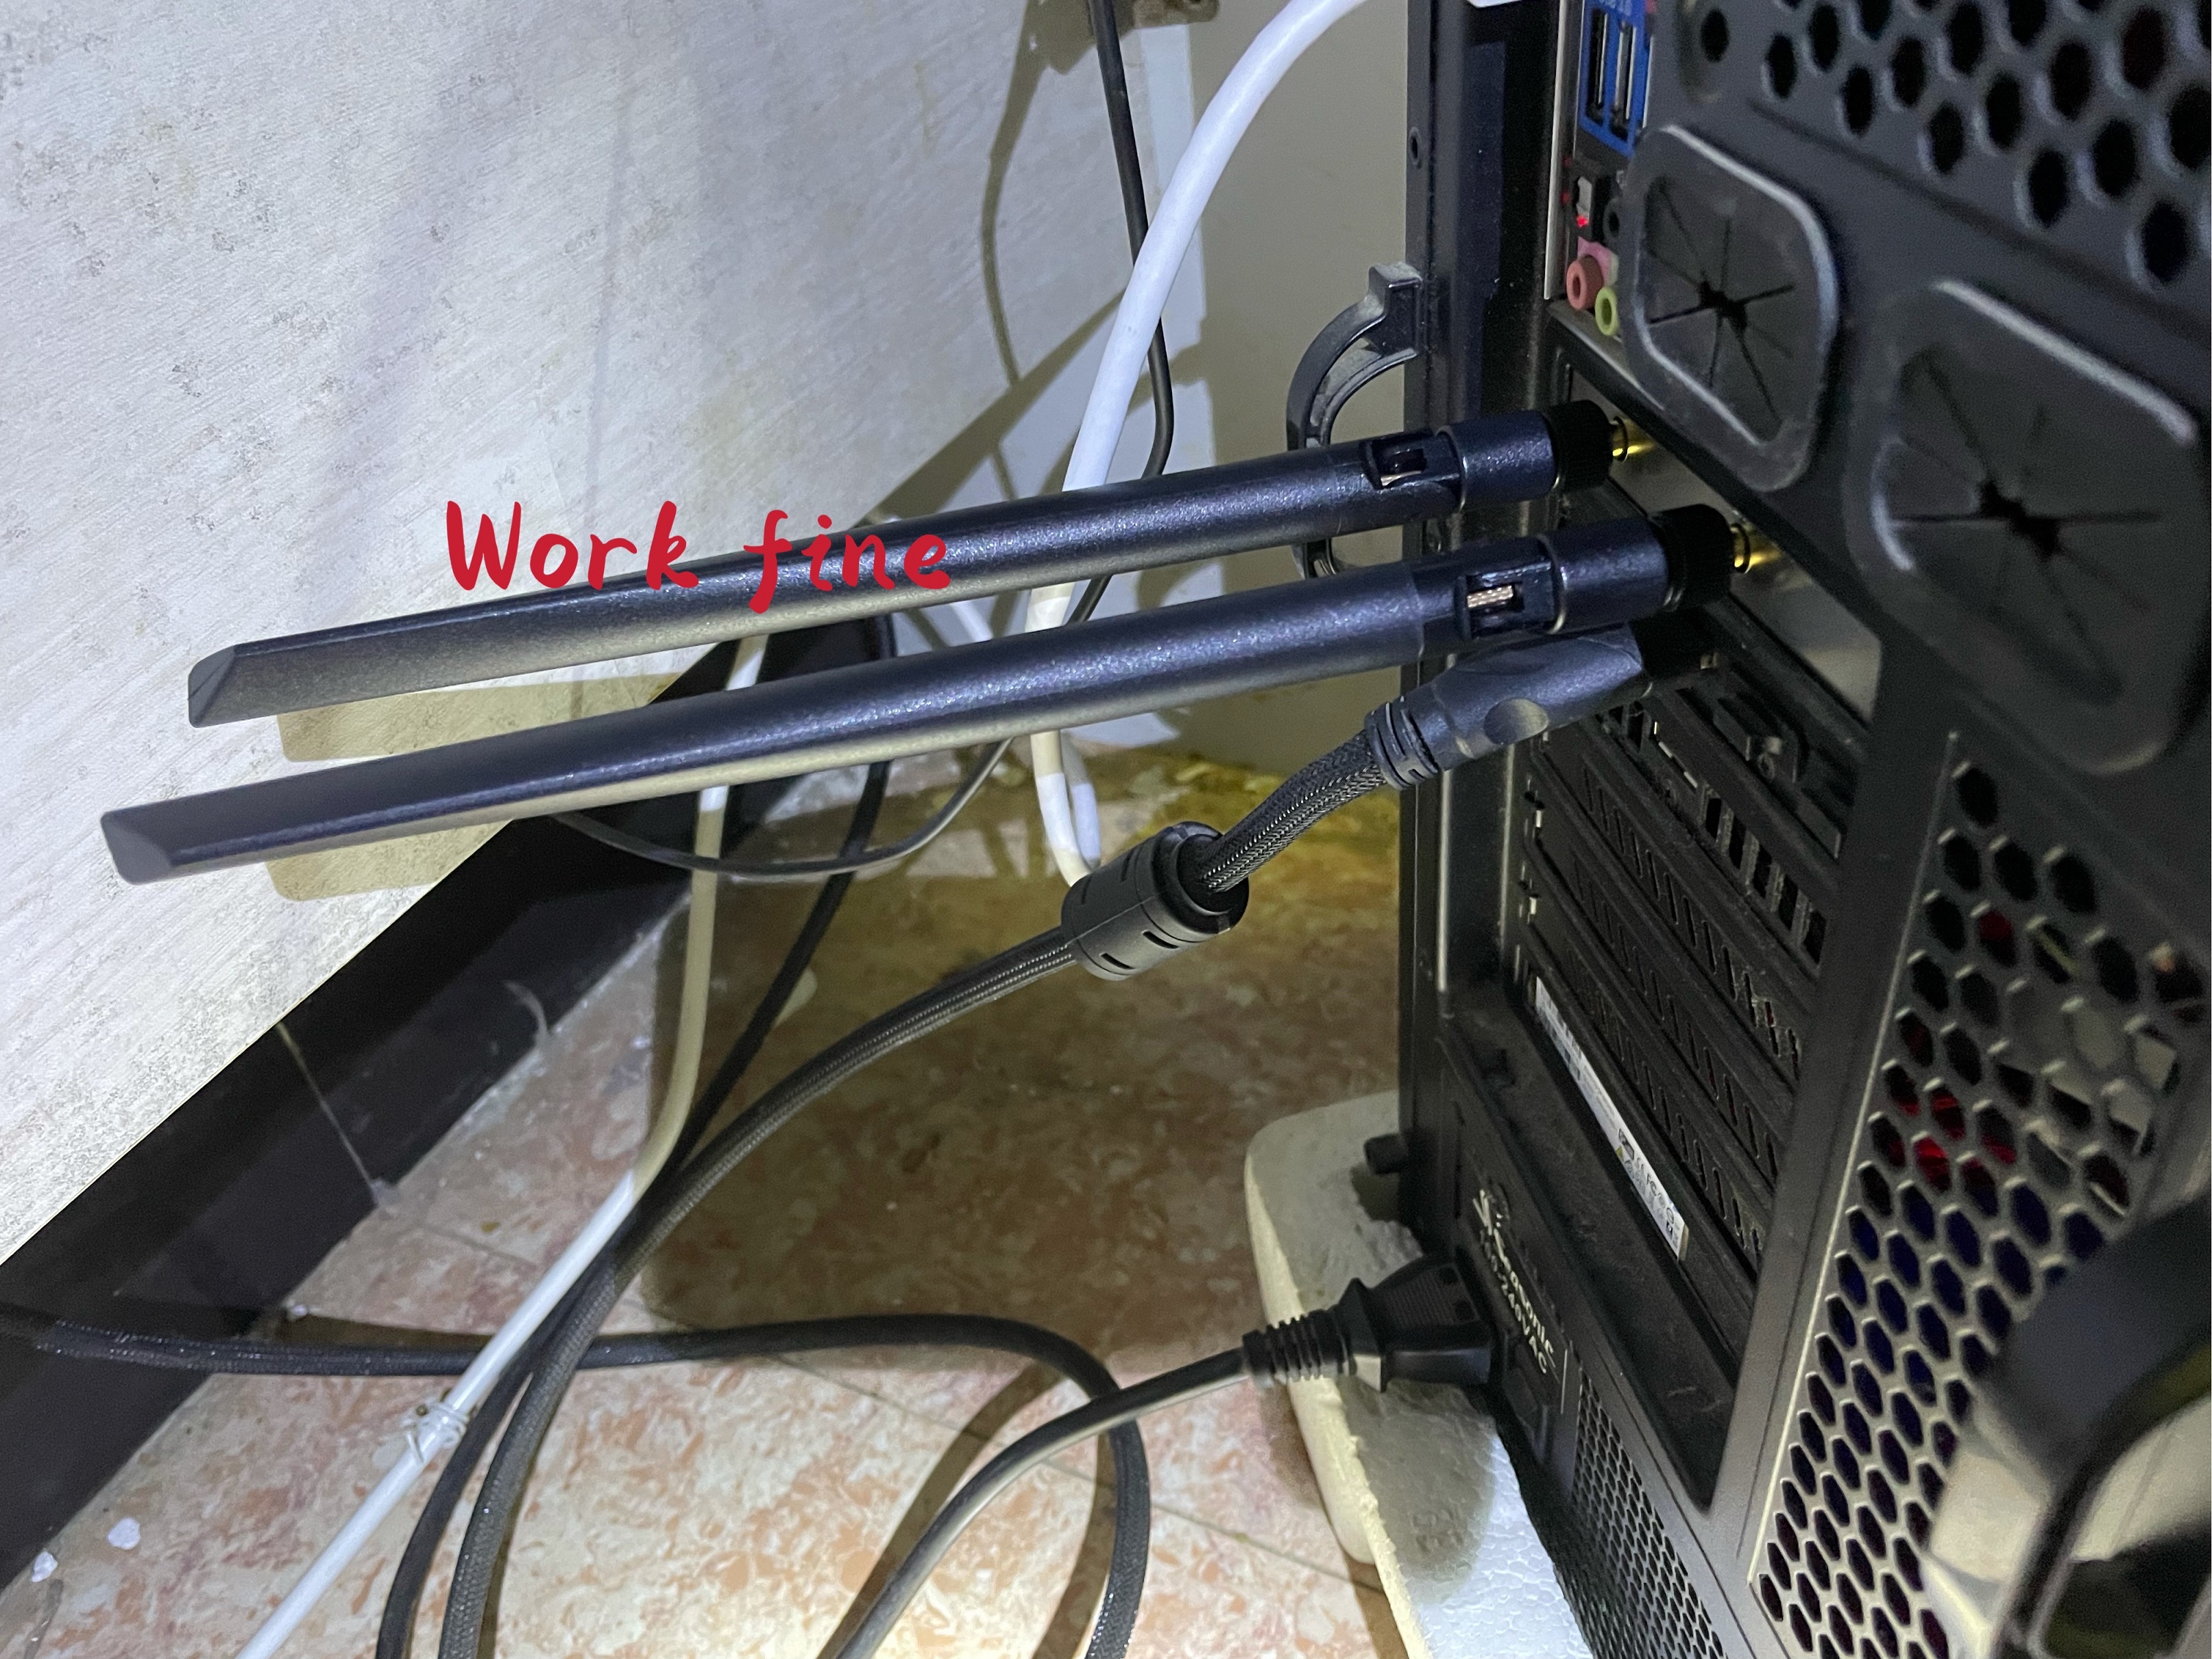 Solved: Wi-Fi 6 AX200 160MHz -2.4GHz & 5GHz: connected, no 